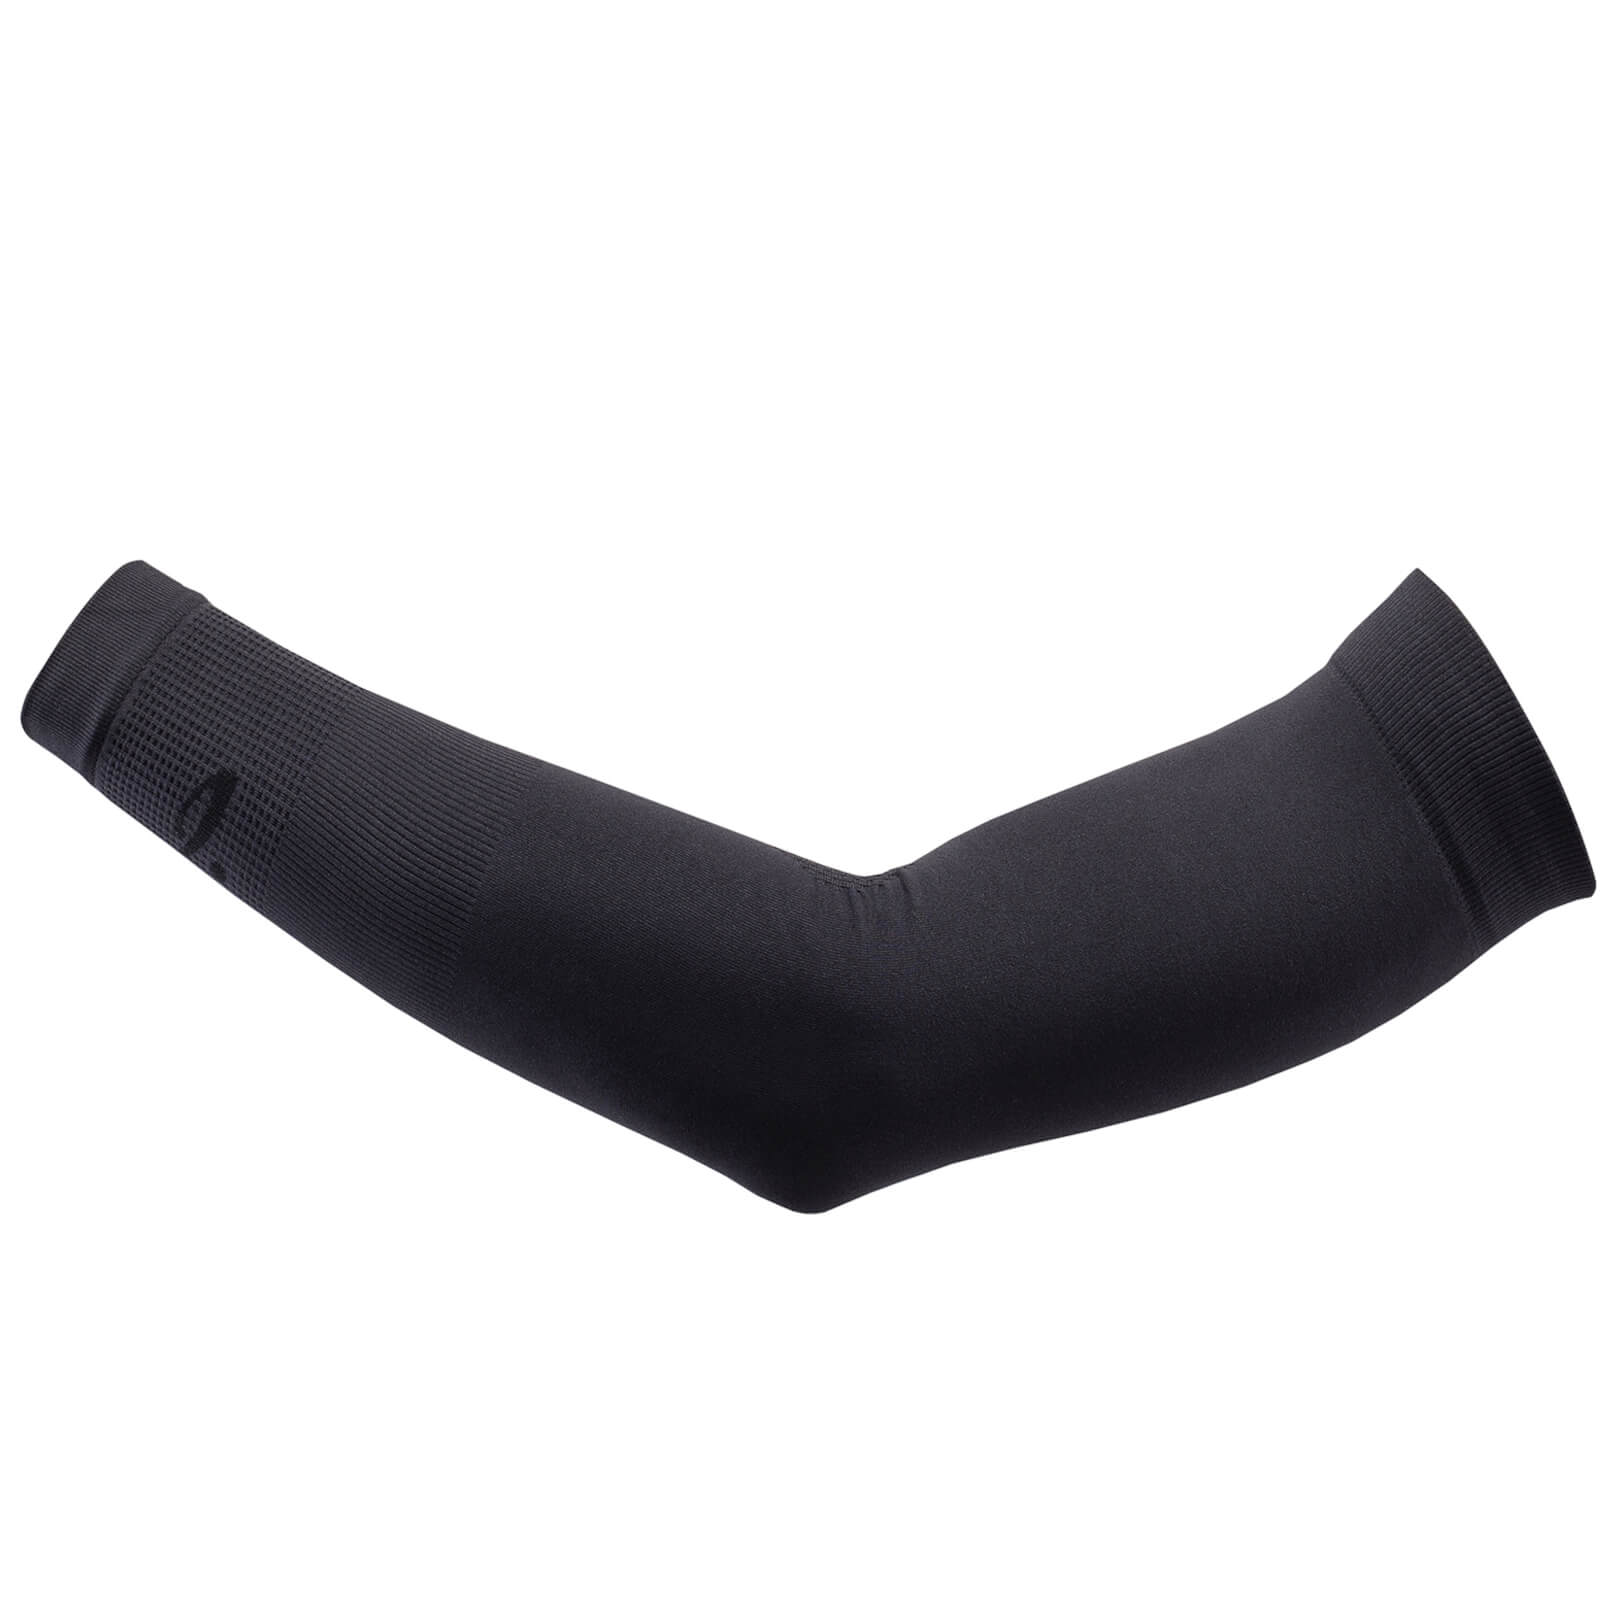 Isadore Alternative Arm Warmers - S/M